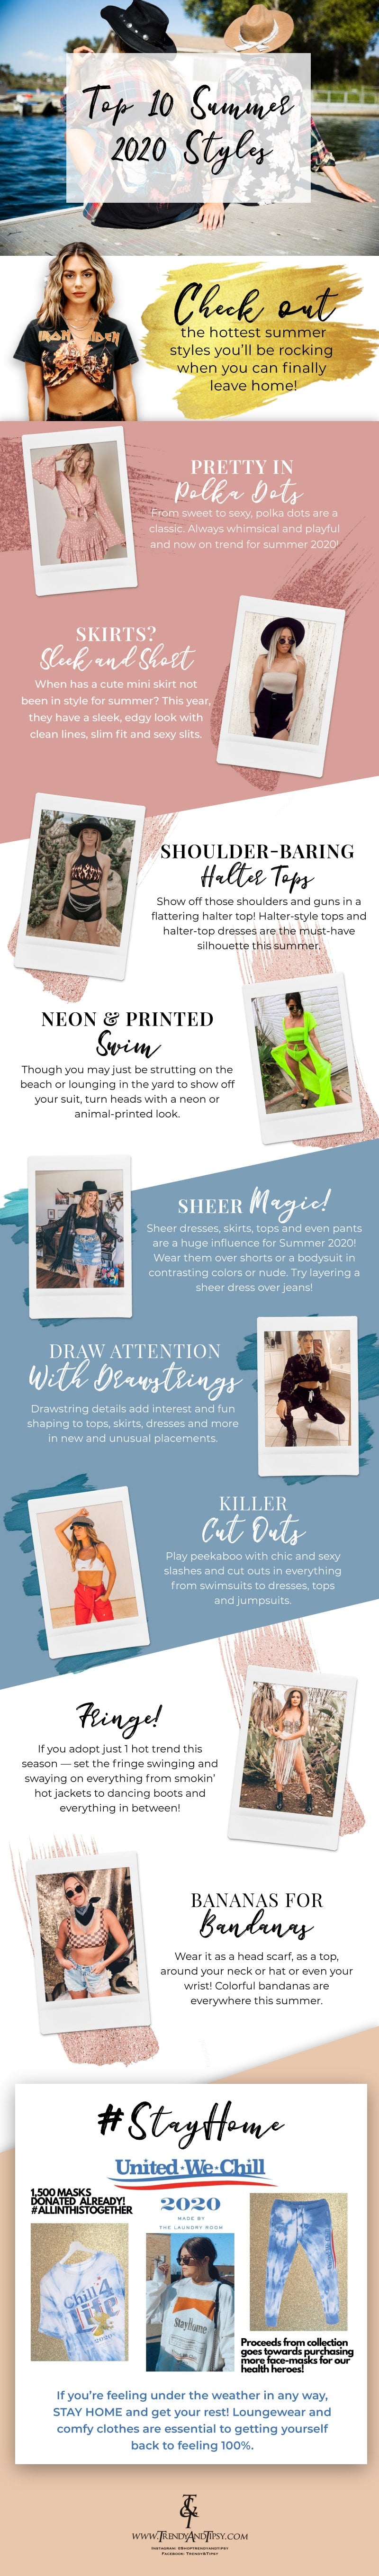 Top 10 Summer Styles for Women in 2020 infographic